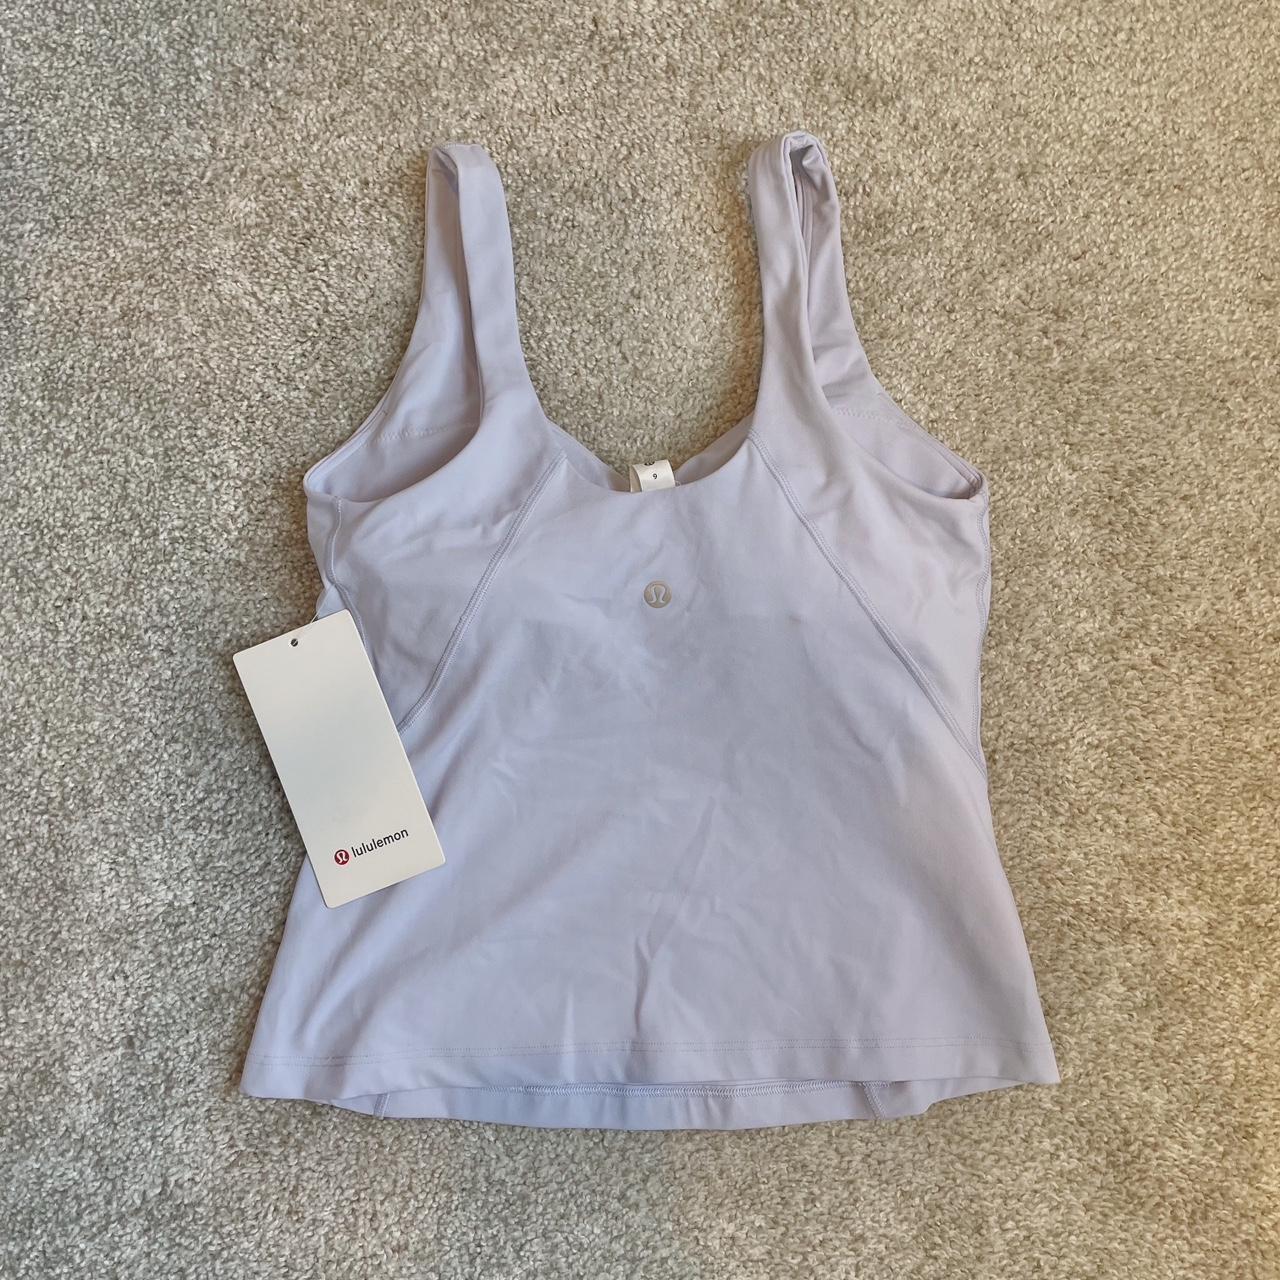 Lululemon Align Tank - Blue Linen / size 14 great condition Pads Included